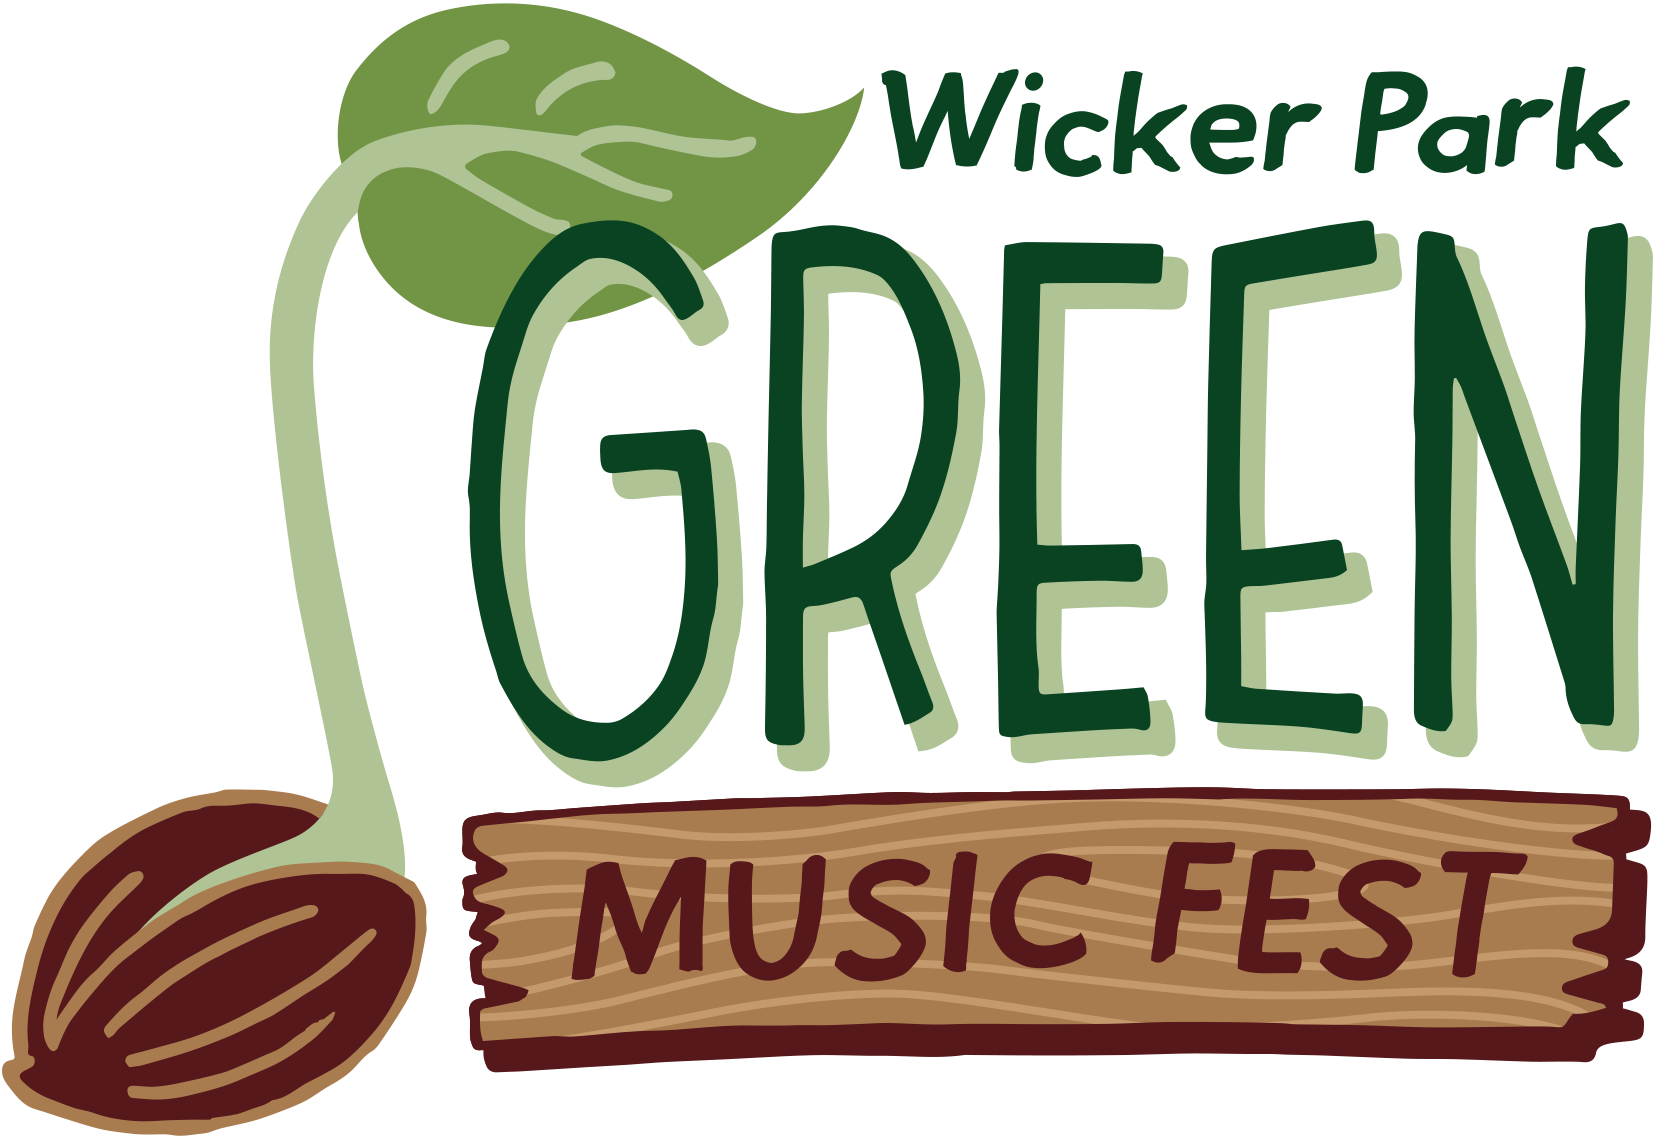 Green Music Fest Continues Its Mission, Making Sure - Wicker Park Green Music Festival (1653x1137)